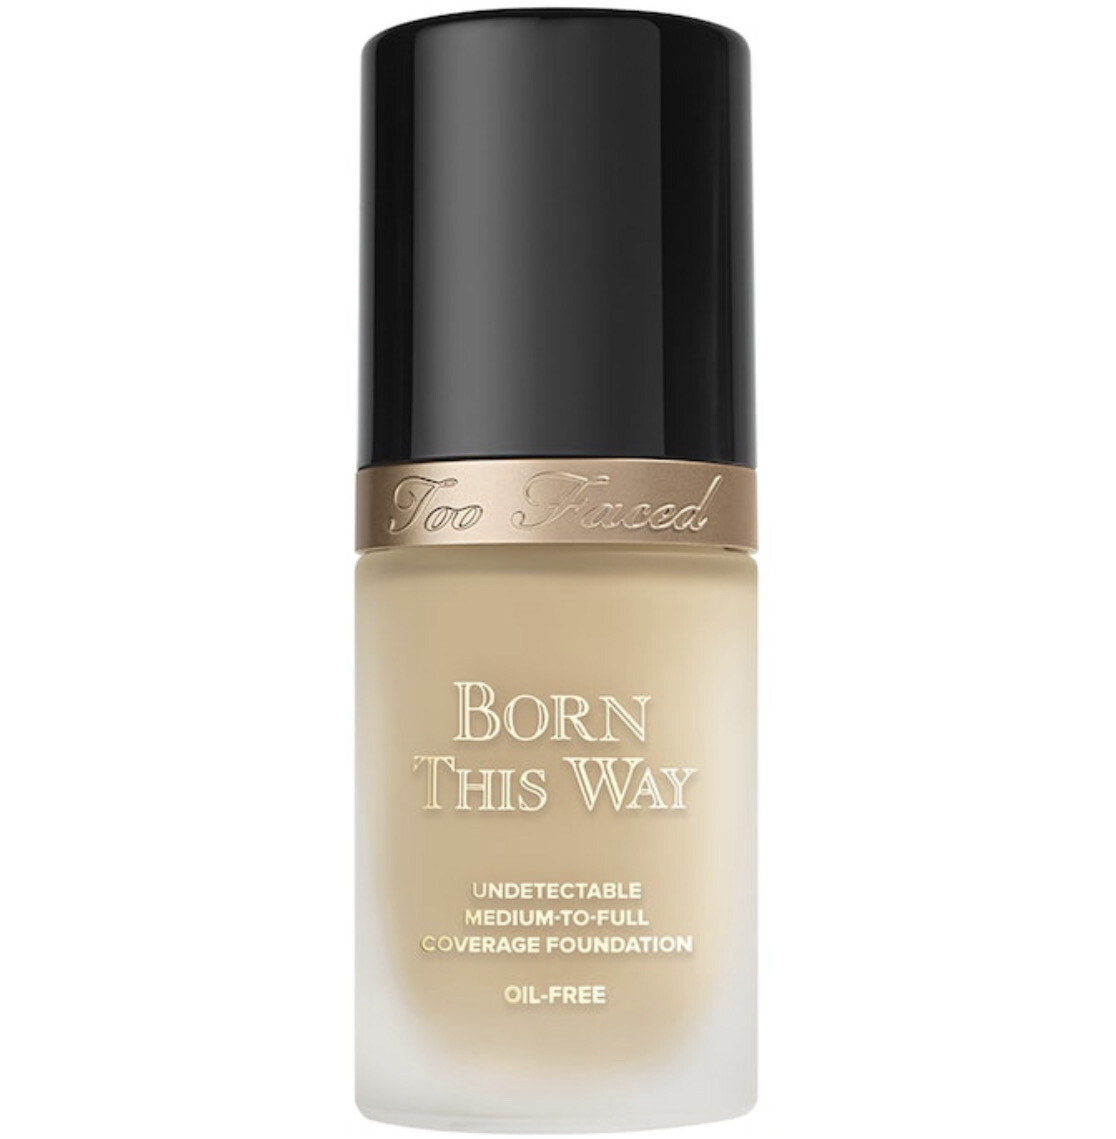 Too Faced - Born This Way Foundation | Almond